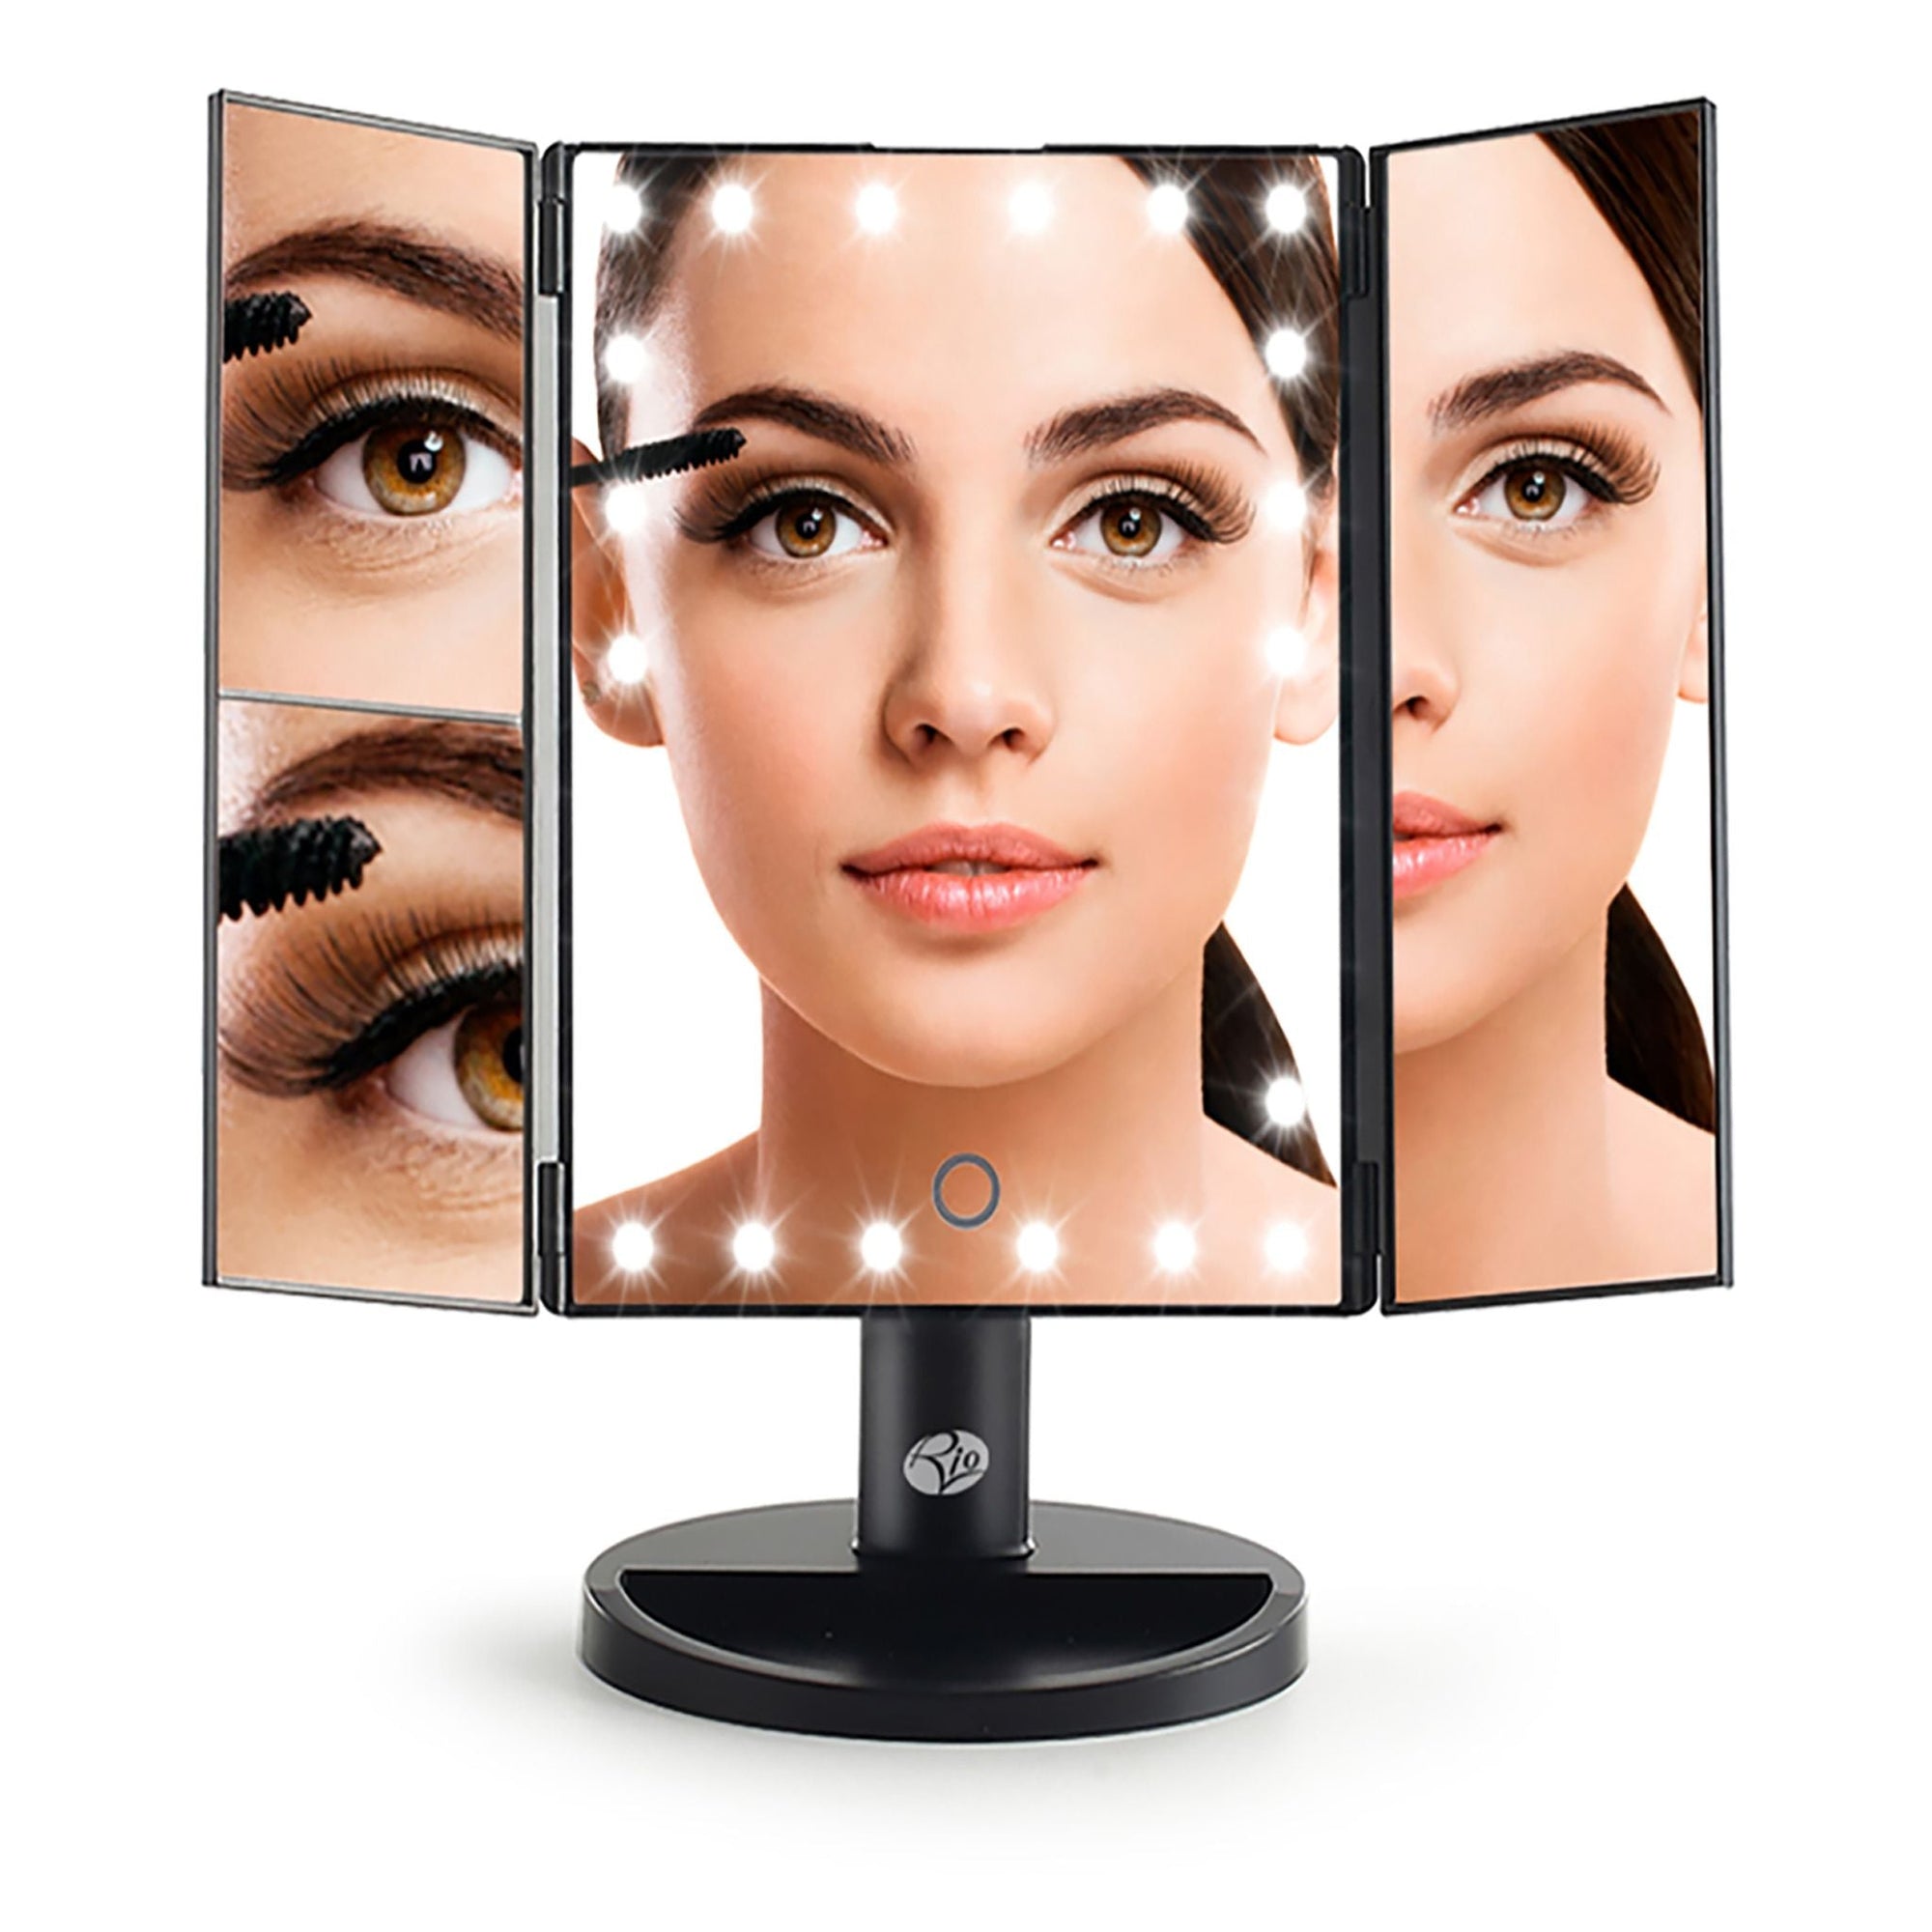 24 LED touch dimmable 3 way make up mirror with 2x and 3x magnification with illuminated LED lights and reflection of ladies face applying mascara